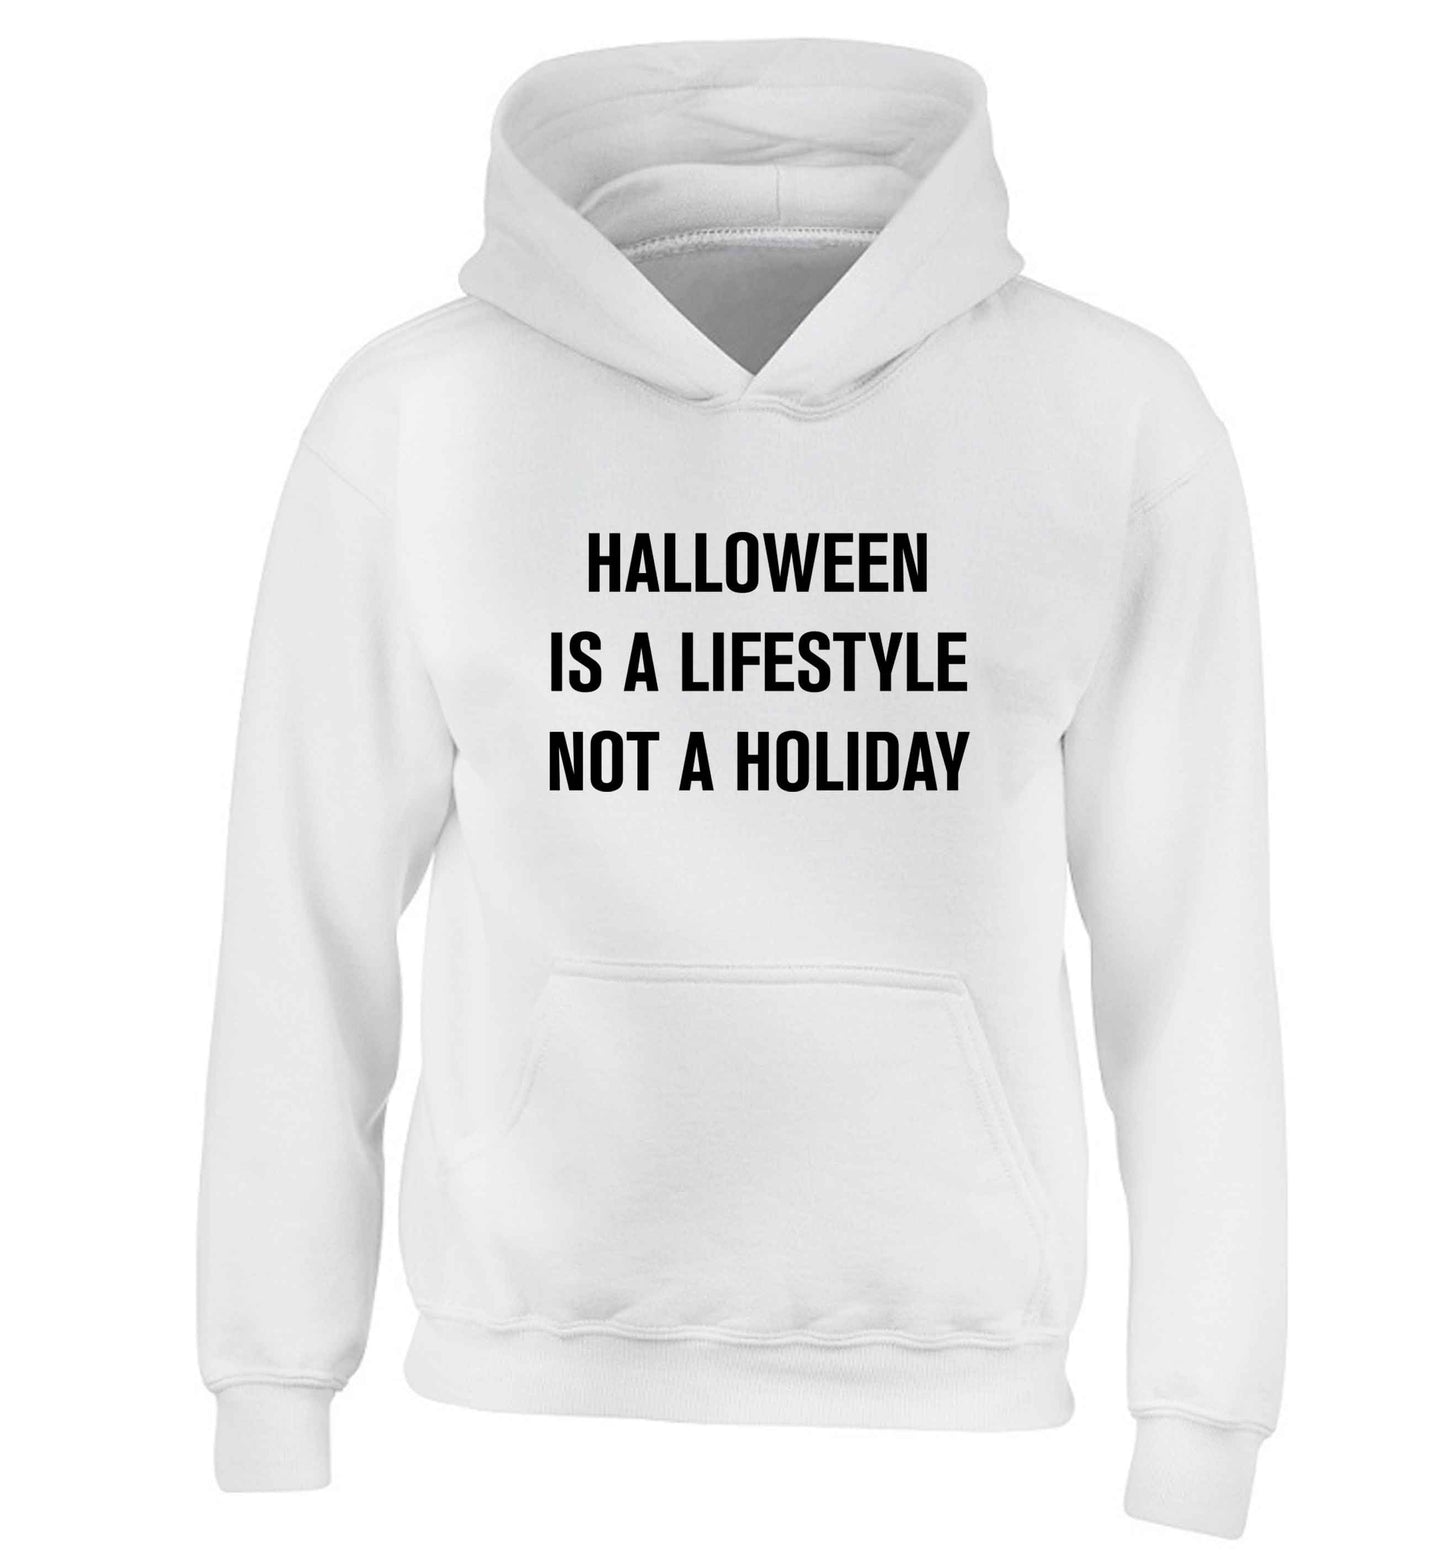 Halloween is a lifestyle not a holiday children's white hoodie 12-13 Years